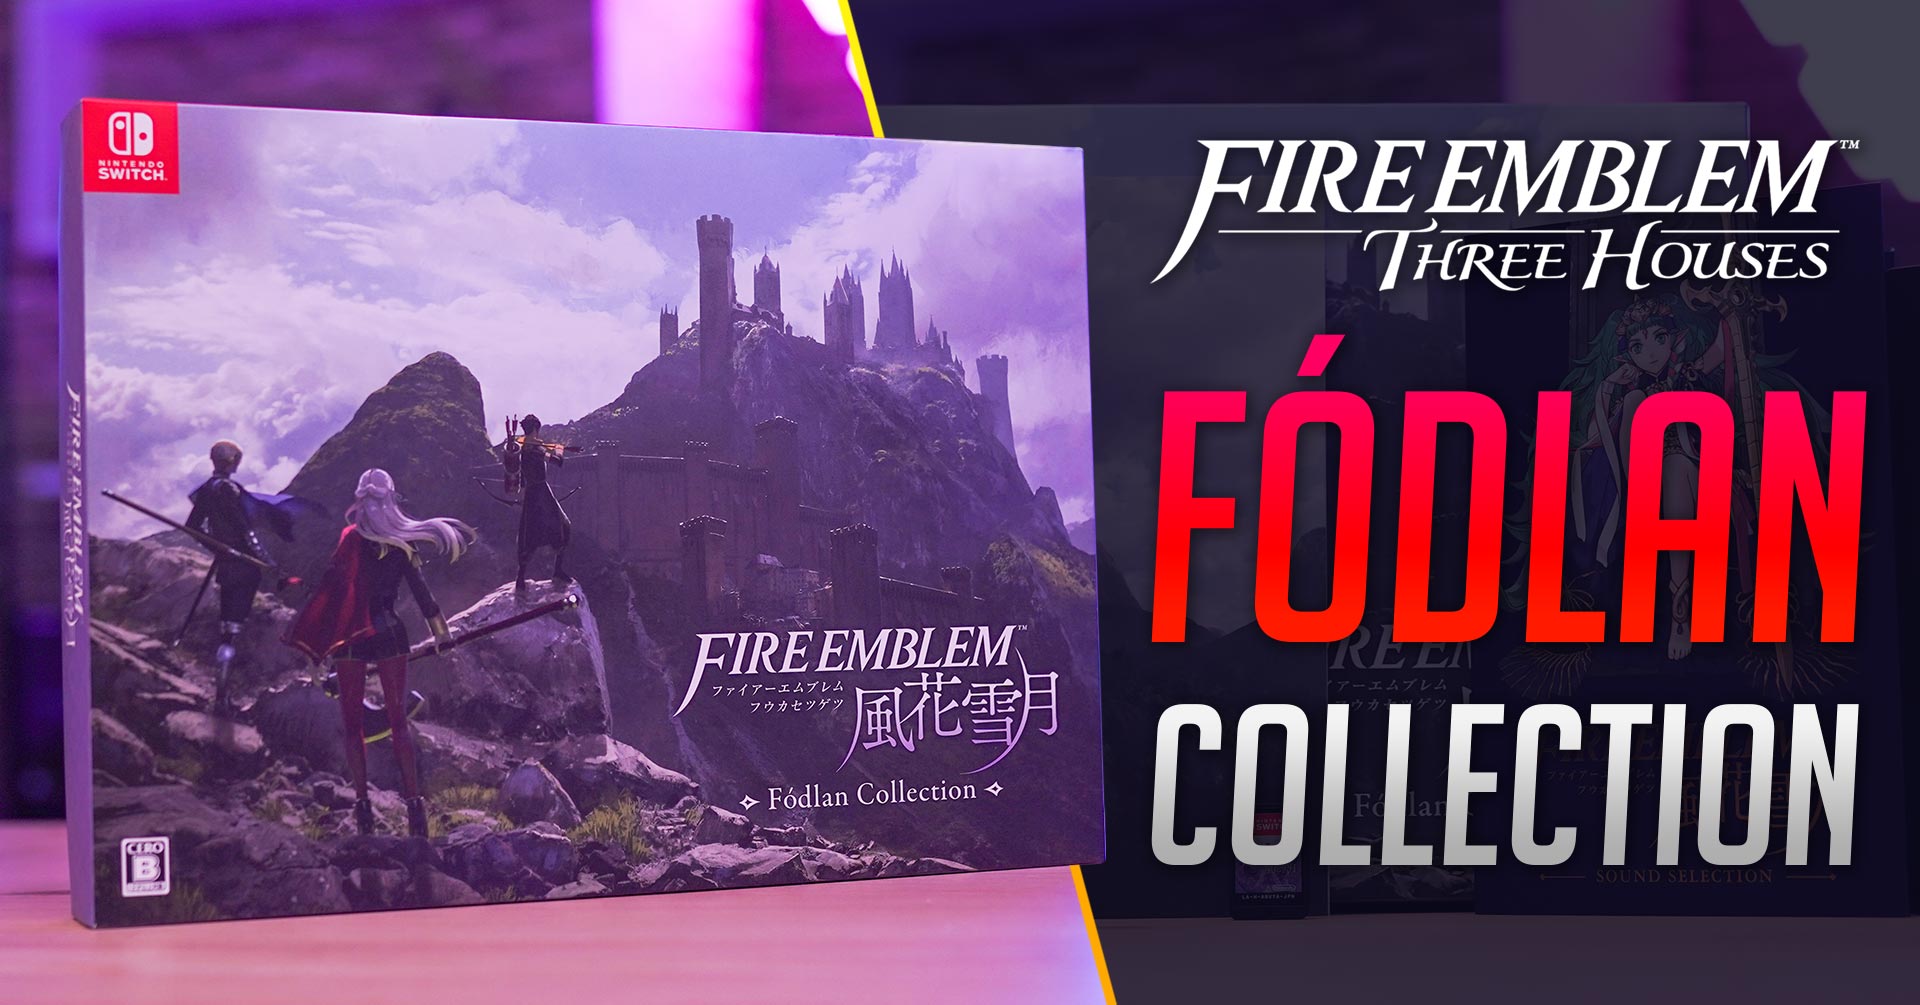 Fire Emblem Three Houses Fodlan Collection Limited Edition Unboxing Review Furypixel Gaming Technology Anime